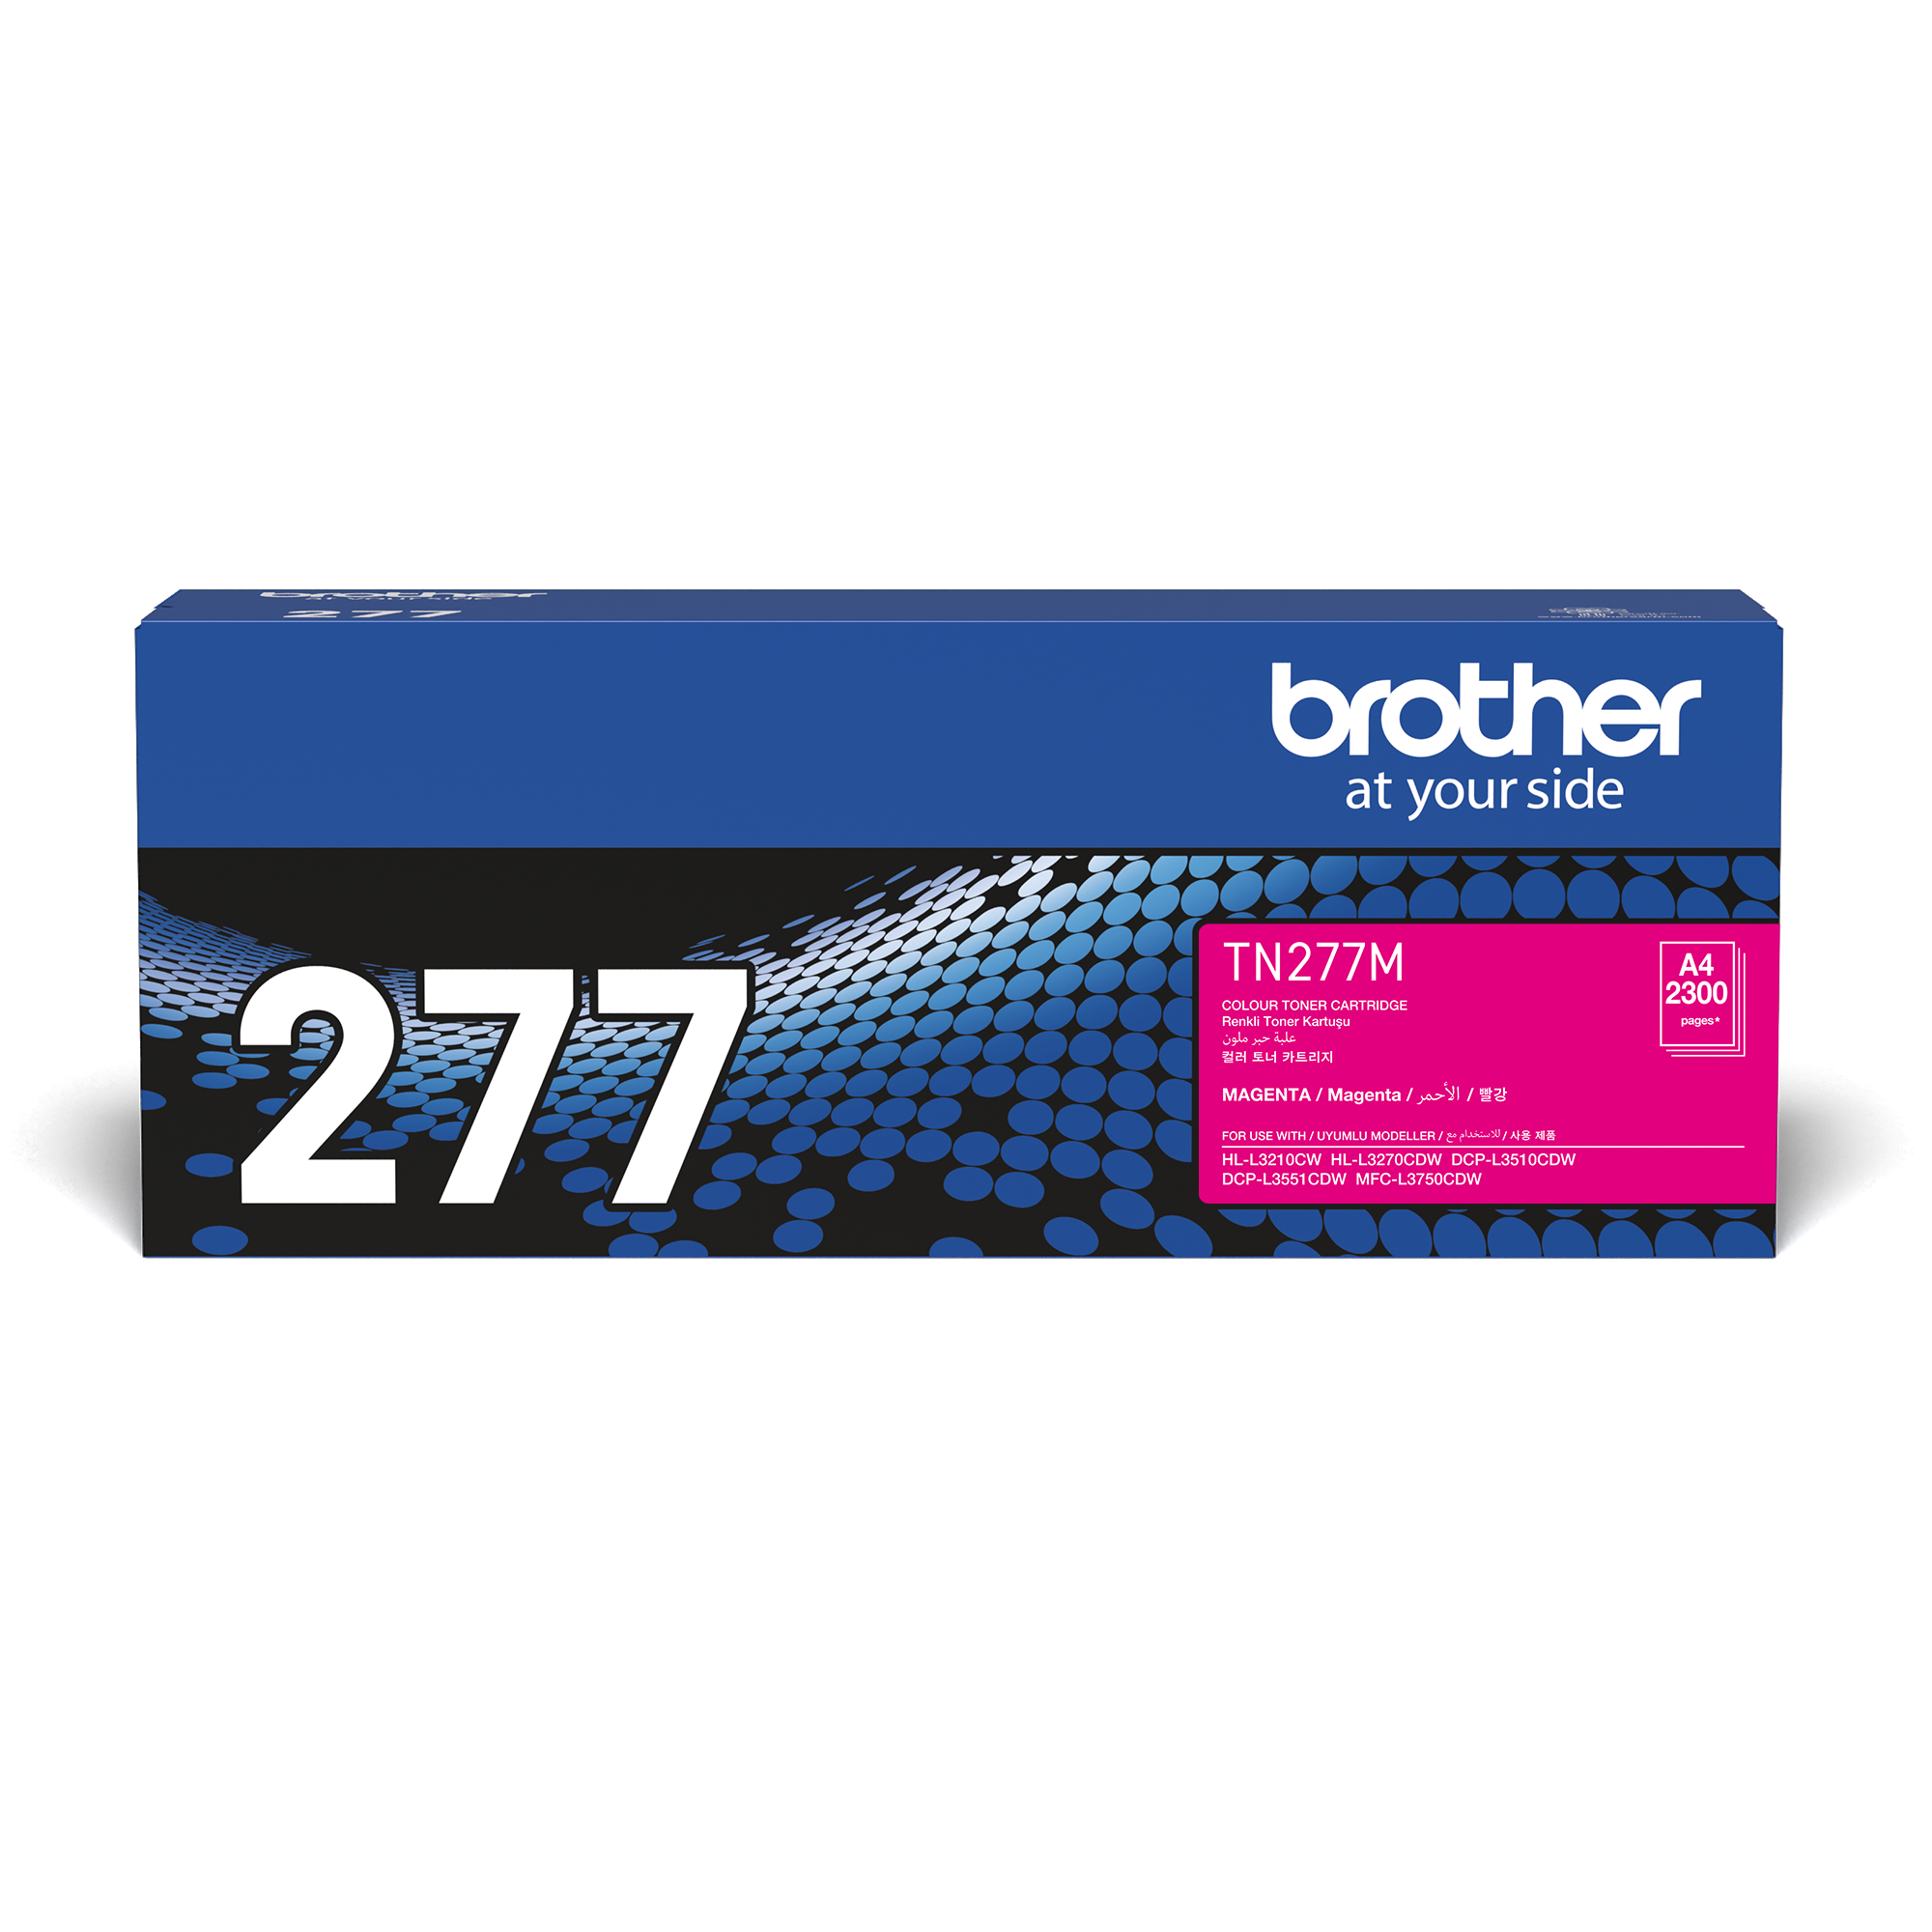 Brother TN277M TN277M Magenta Toner Cartridge (2,300 Pages)